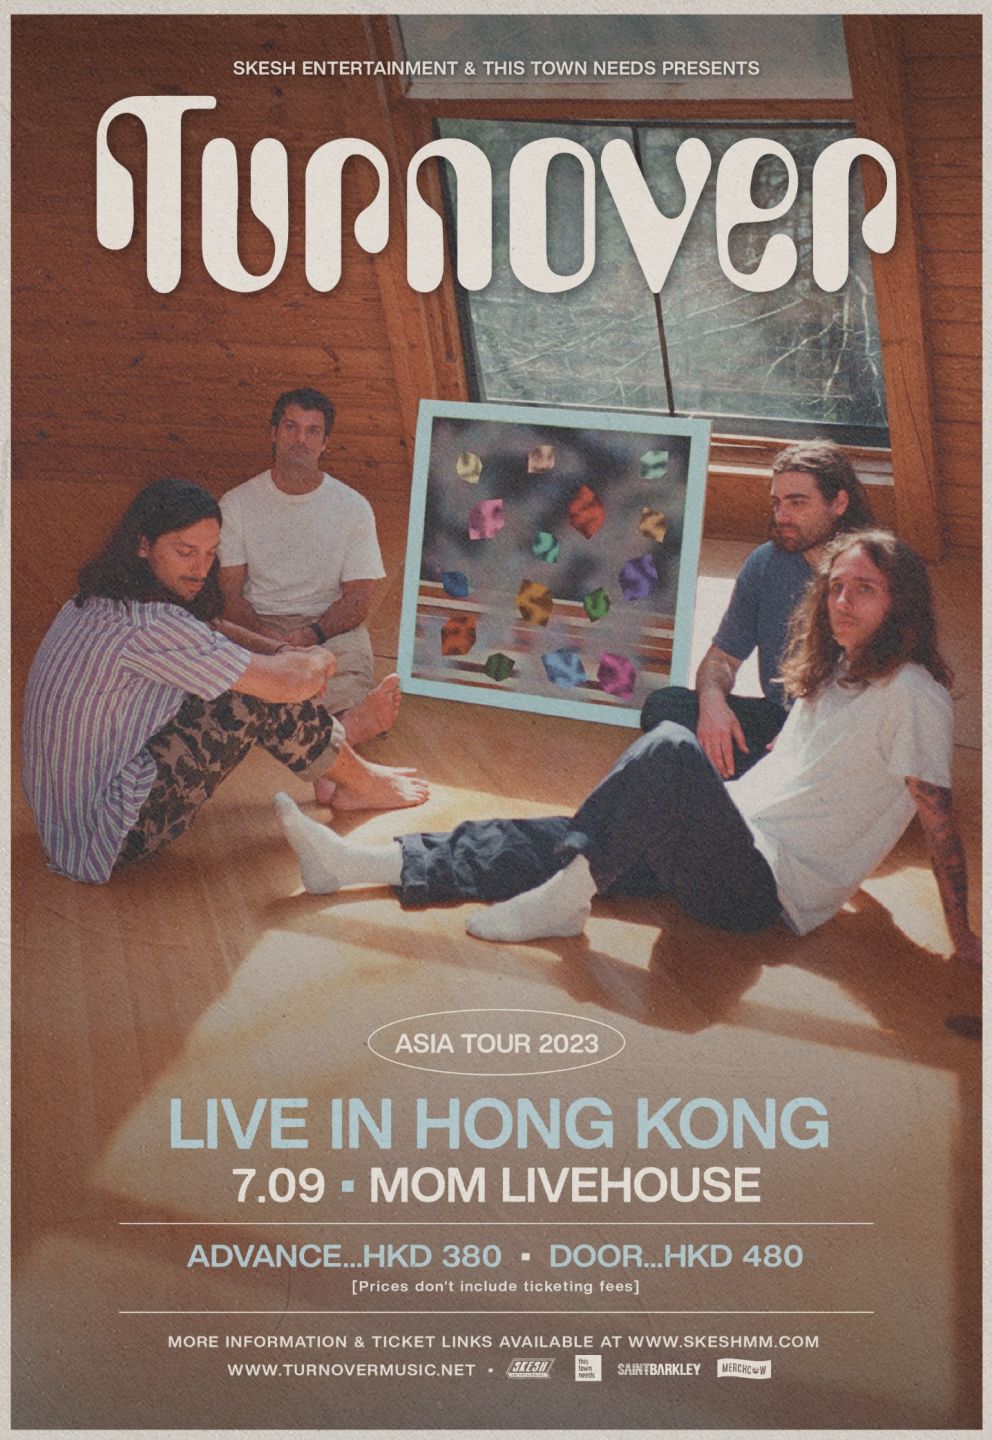  THIS TOWN NEEDS PRESENTS：Turnover Live in Hong Kong